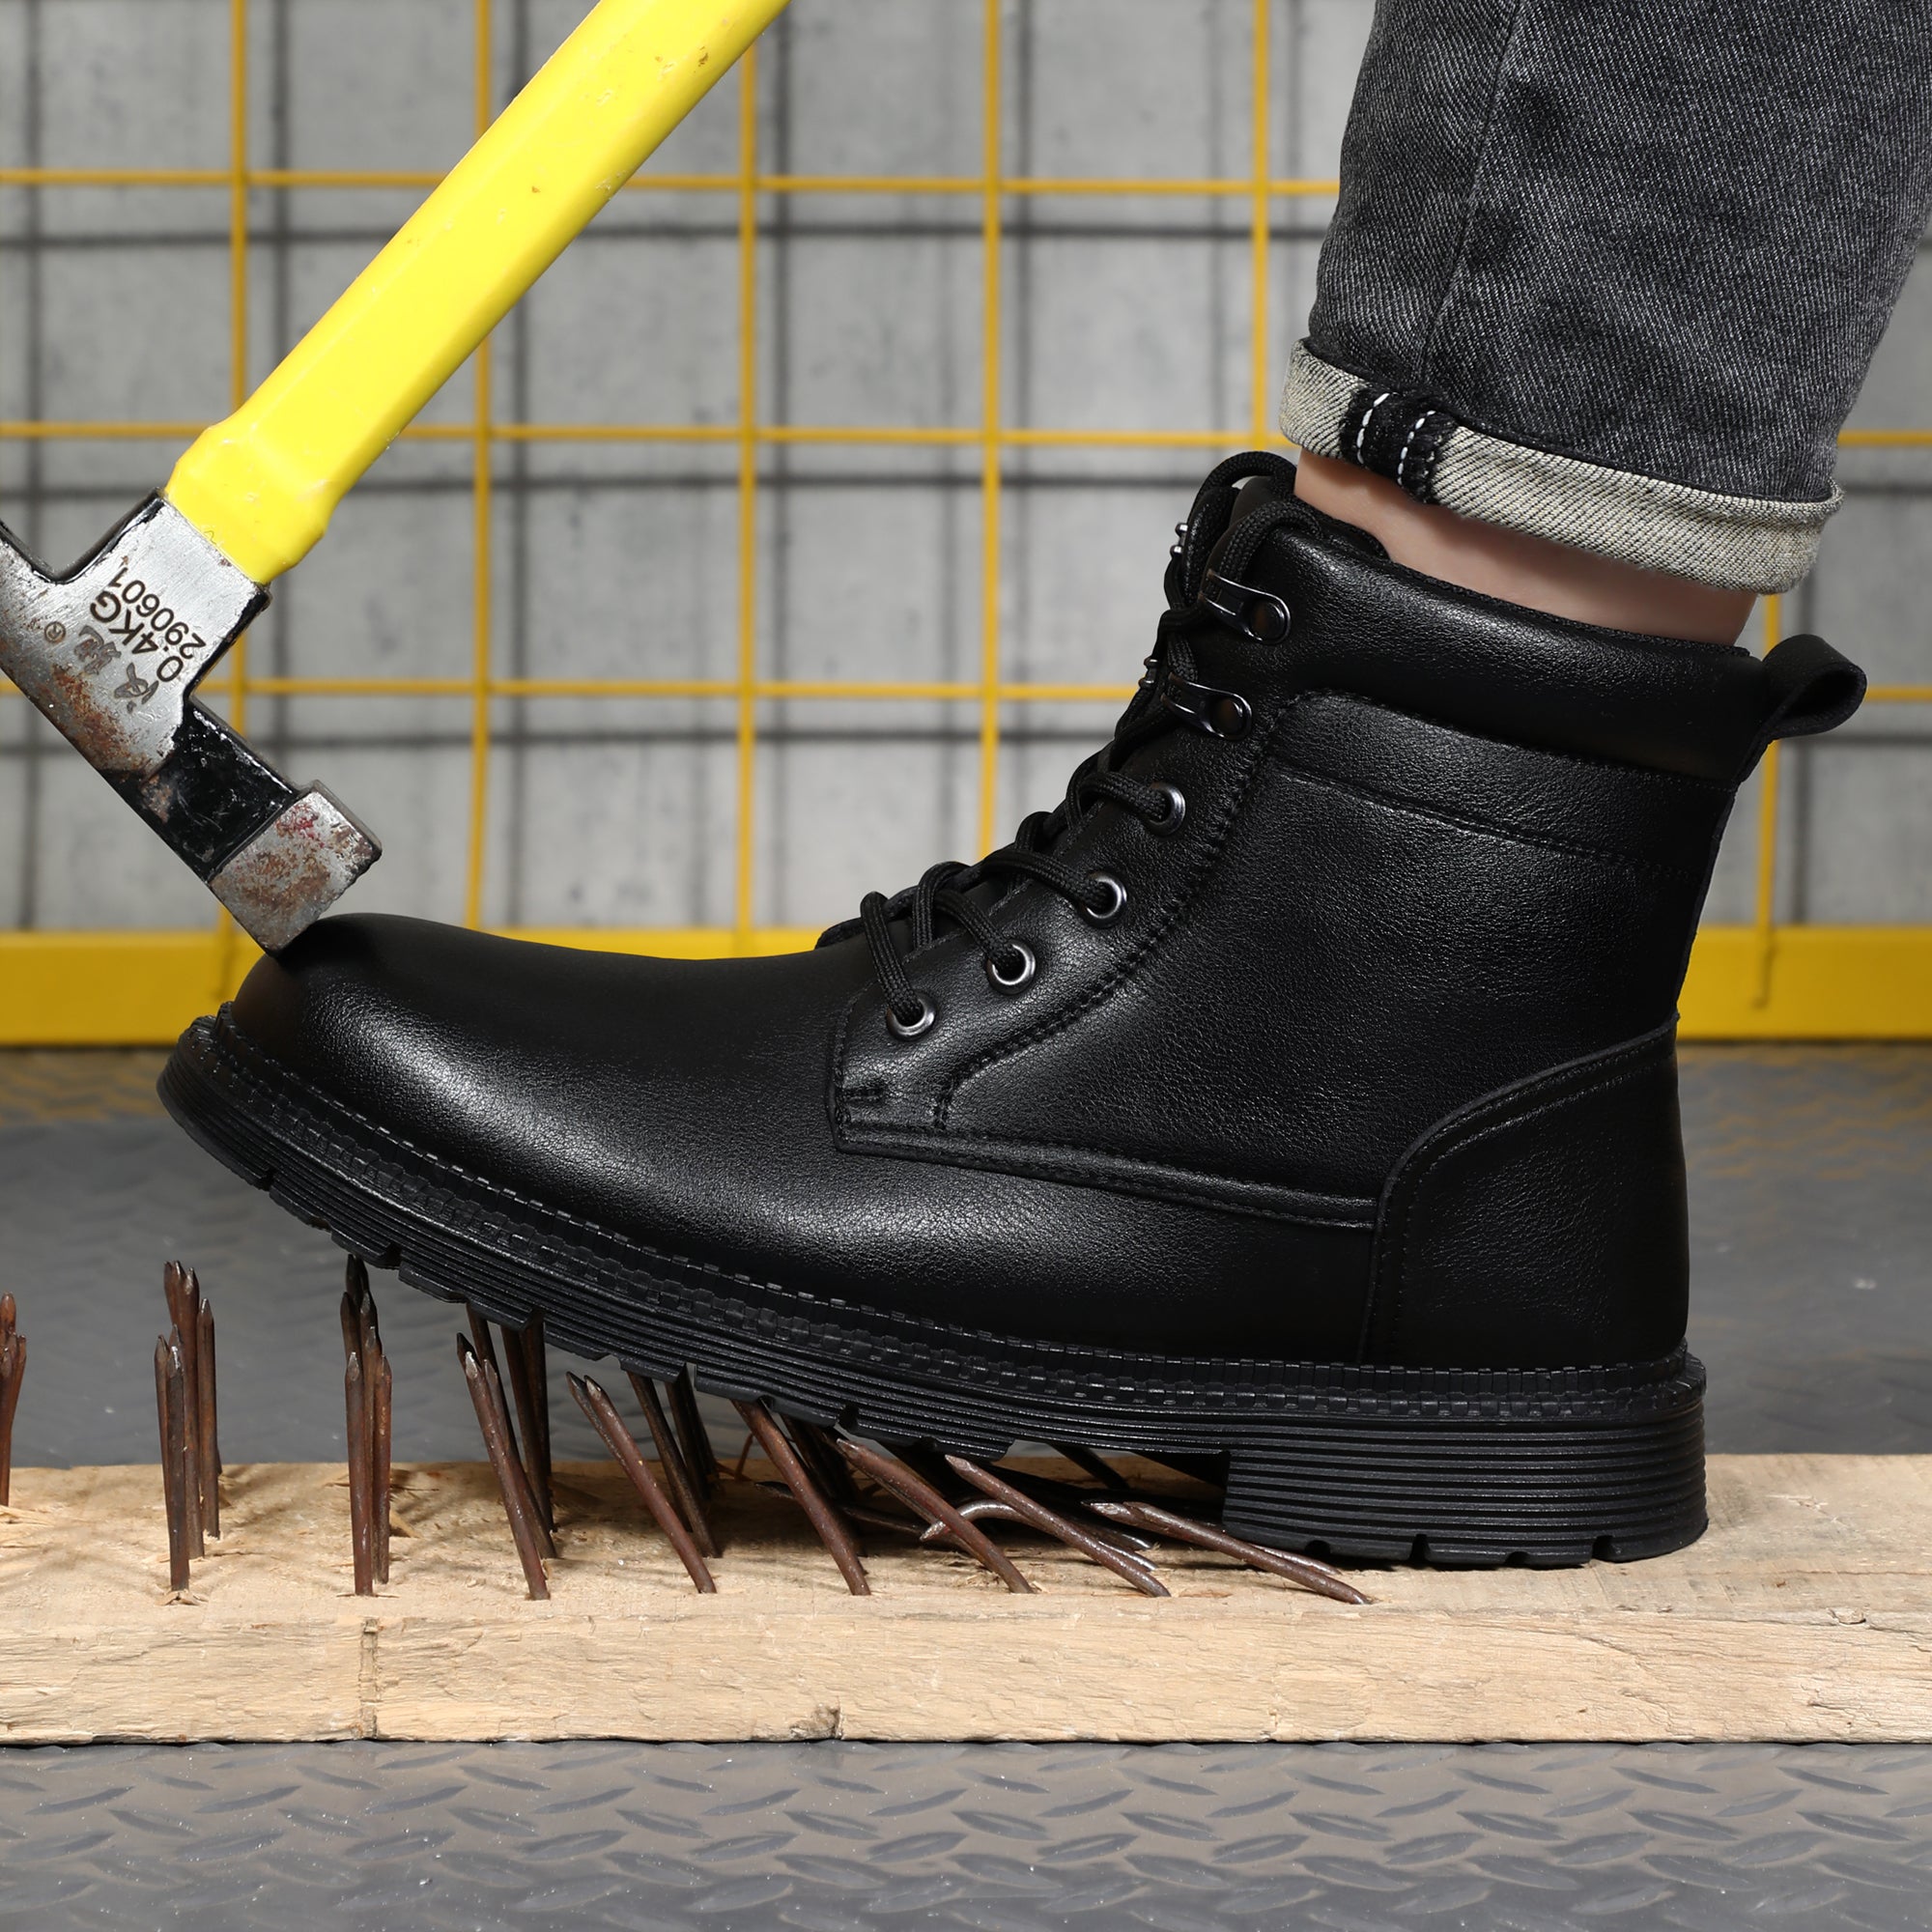 Panther Black PU Leather Safety Boot: Water-resistant, steel toe cap, and built for durability. Your long-lasting choice for reliable safety